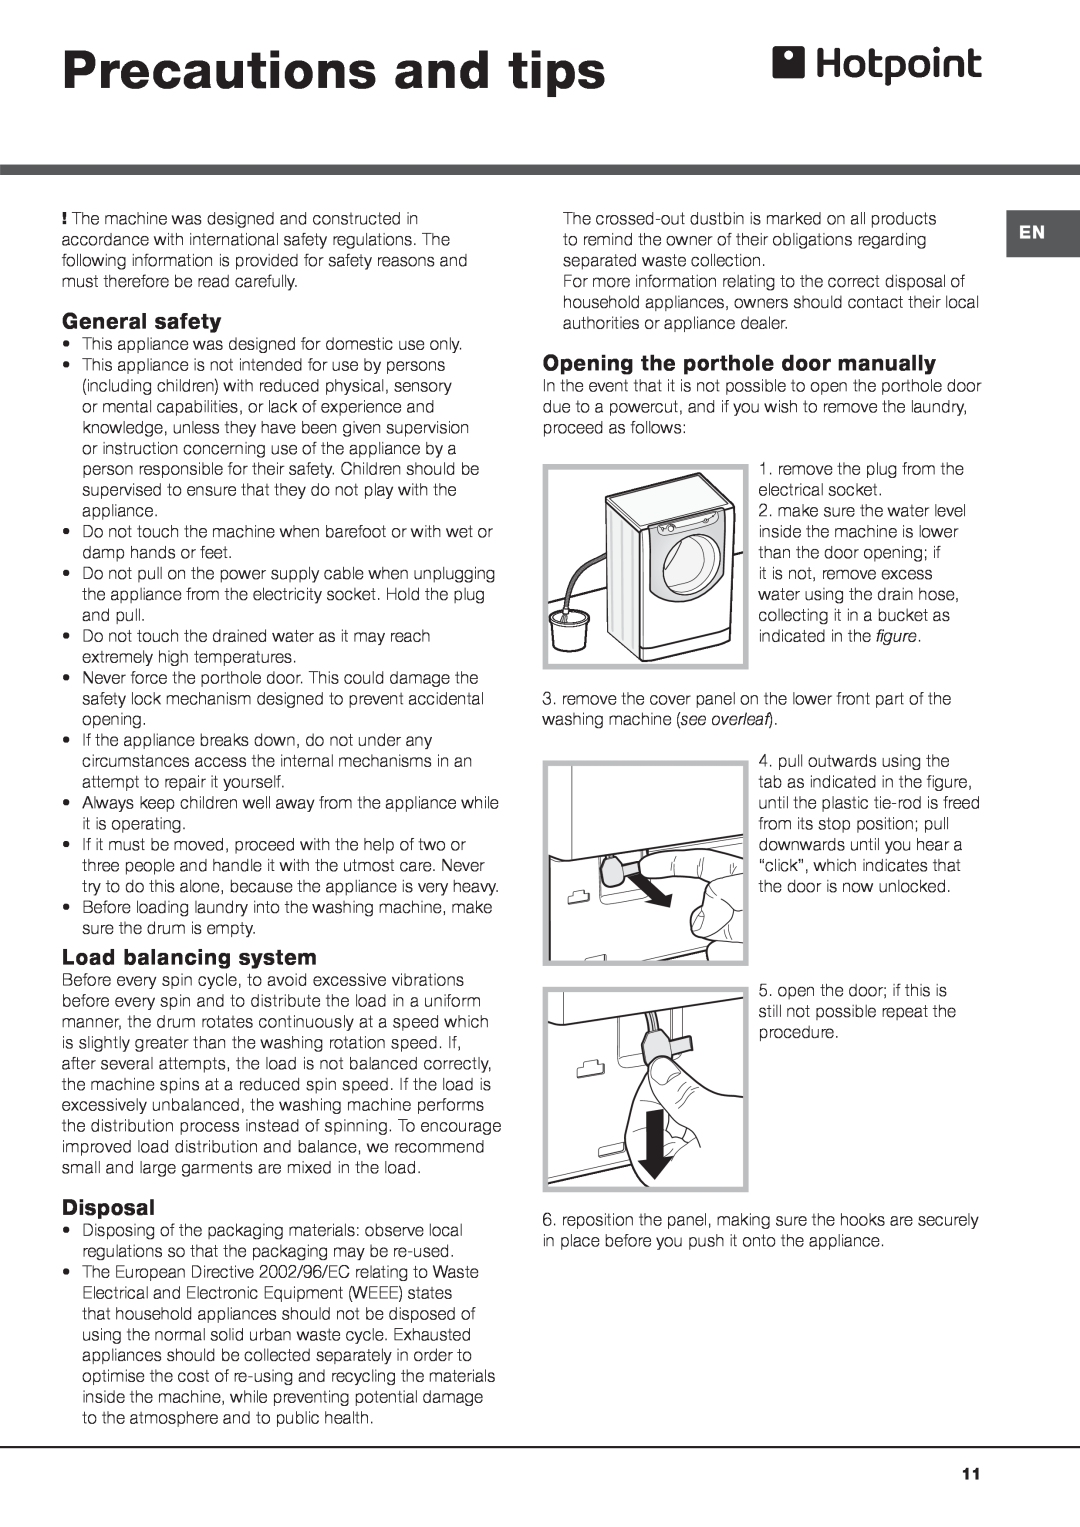 Hotpoint AQ113L 297 E manual Precautions and tips, General safety, Load balancing system, Disposal 